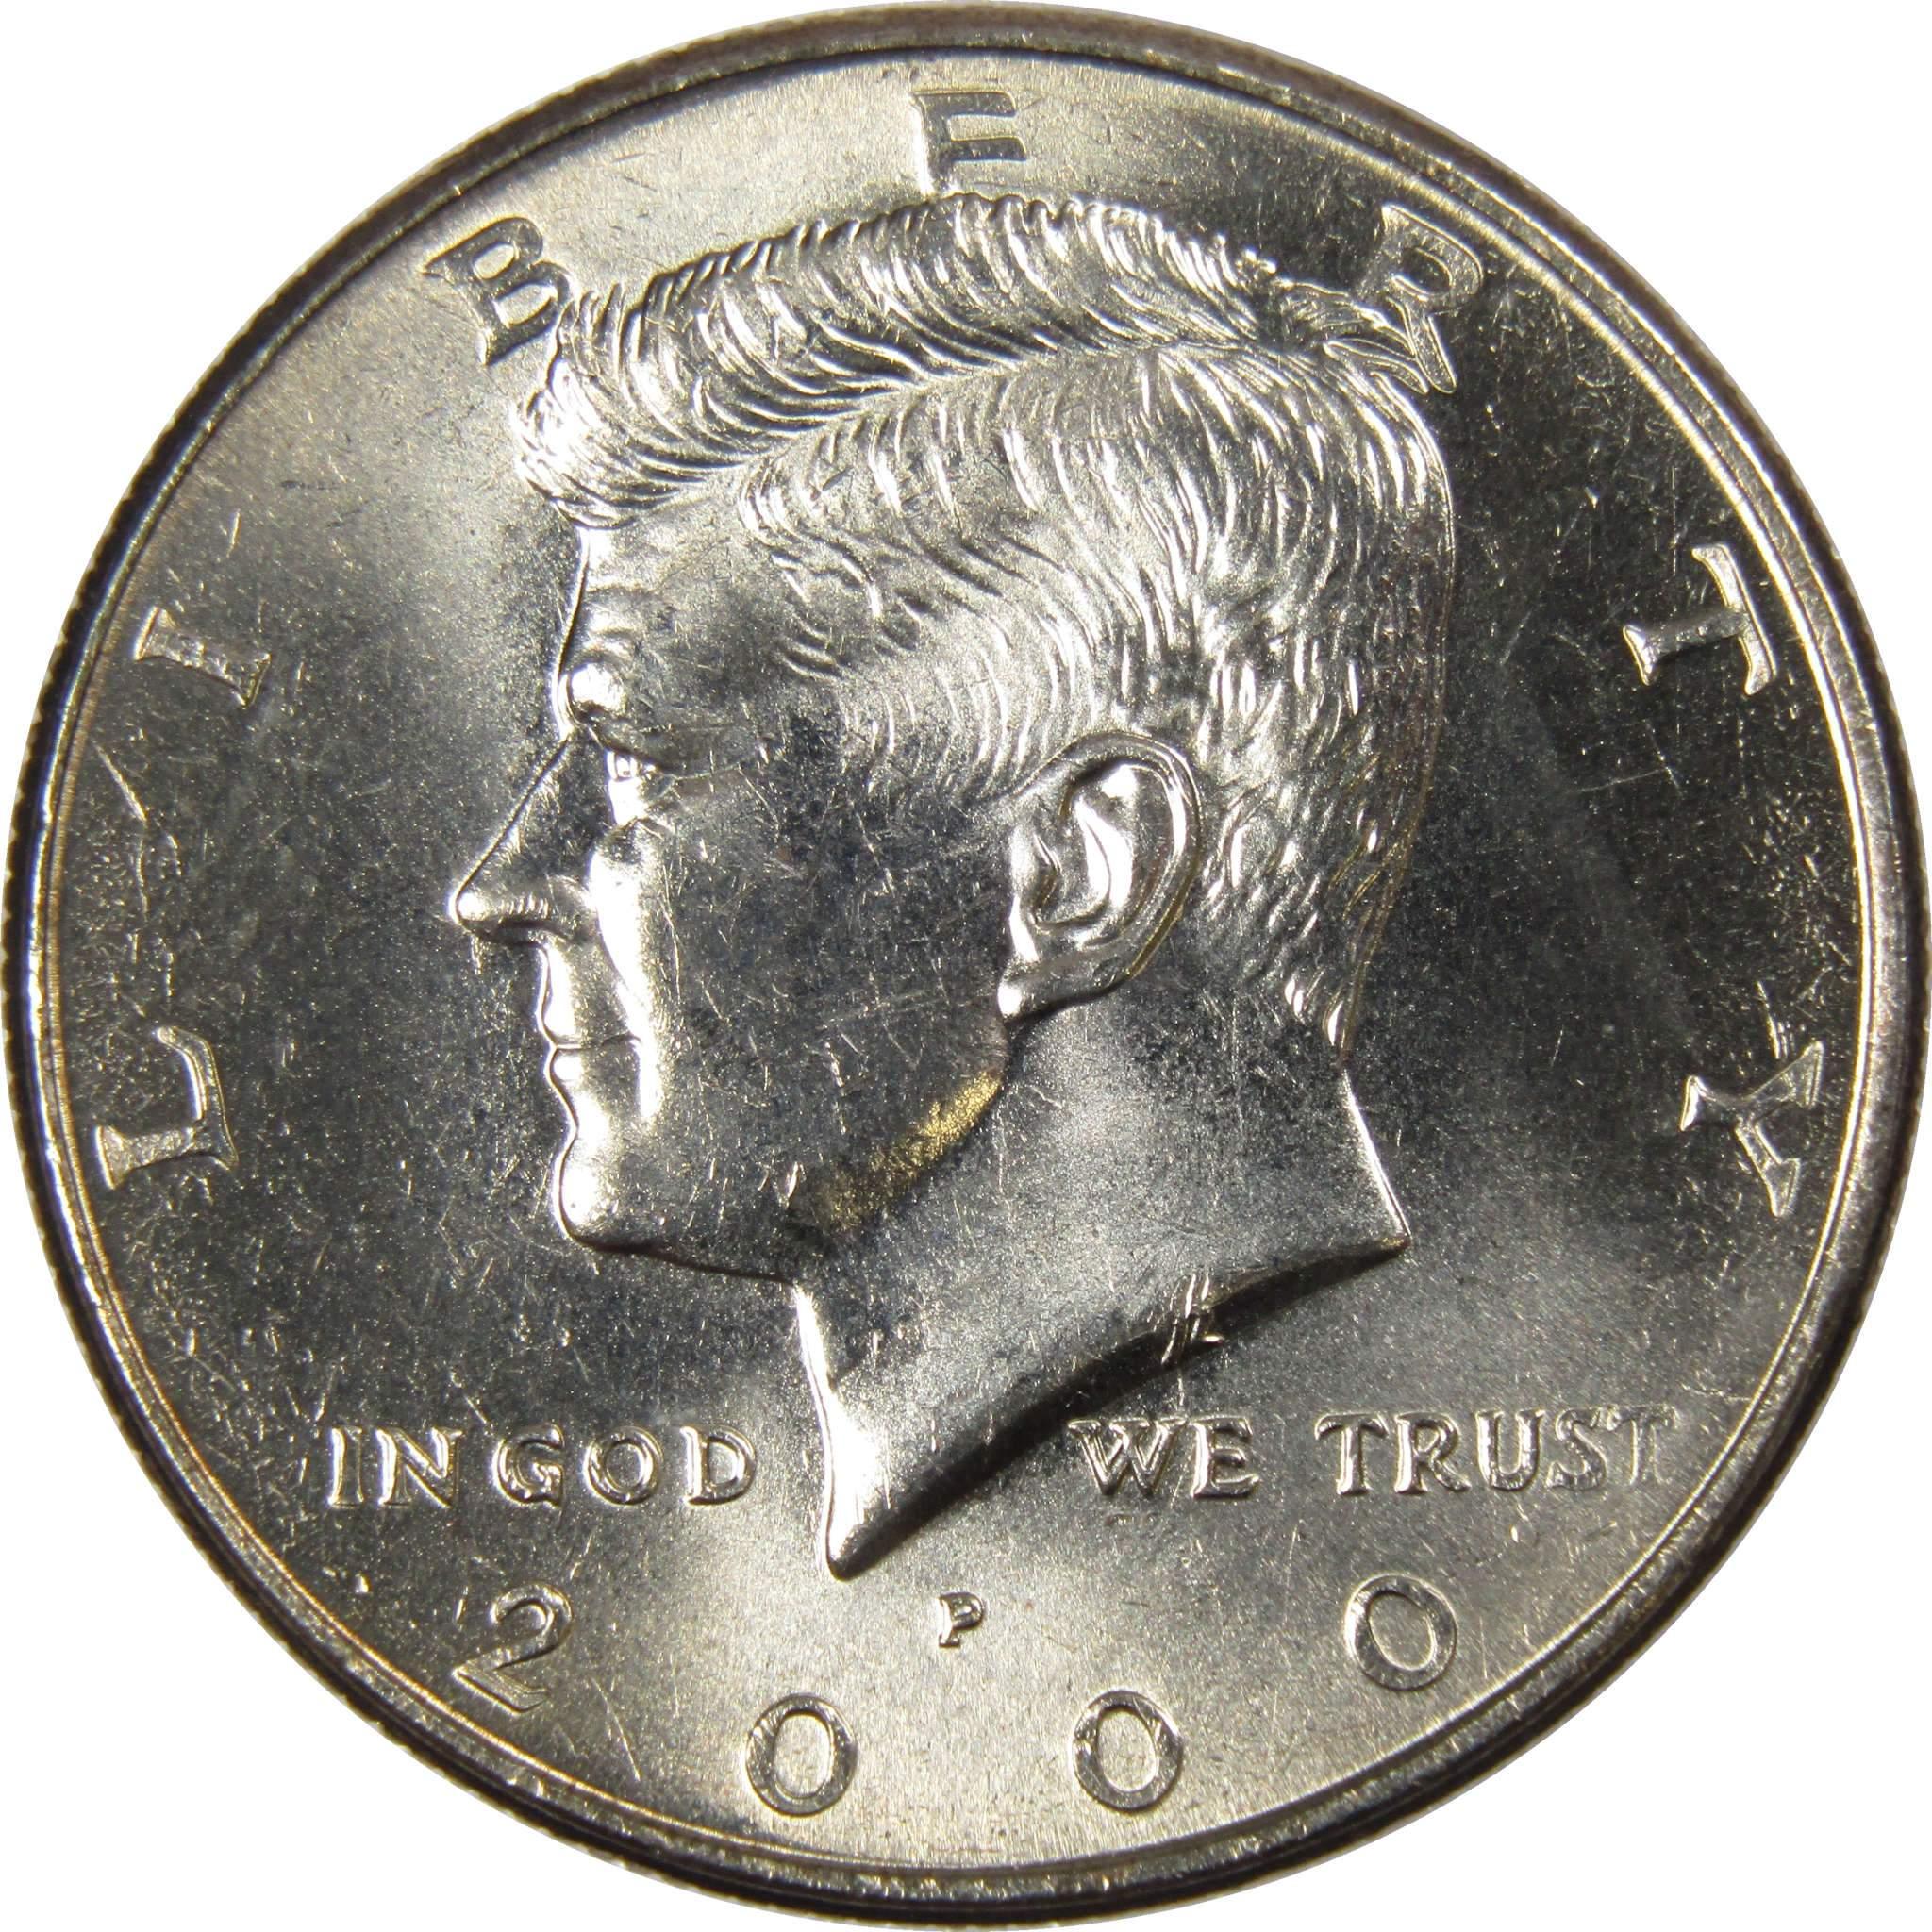 2000 P Kennedy Half Dollar BU Uncirculated Mint State 50c US Coin Collectible